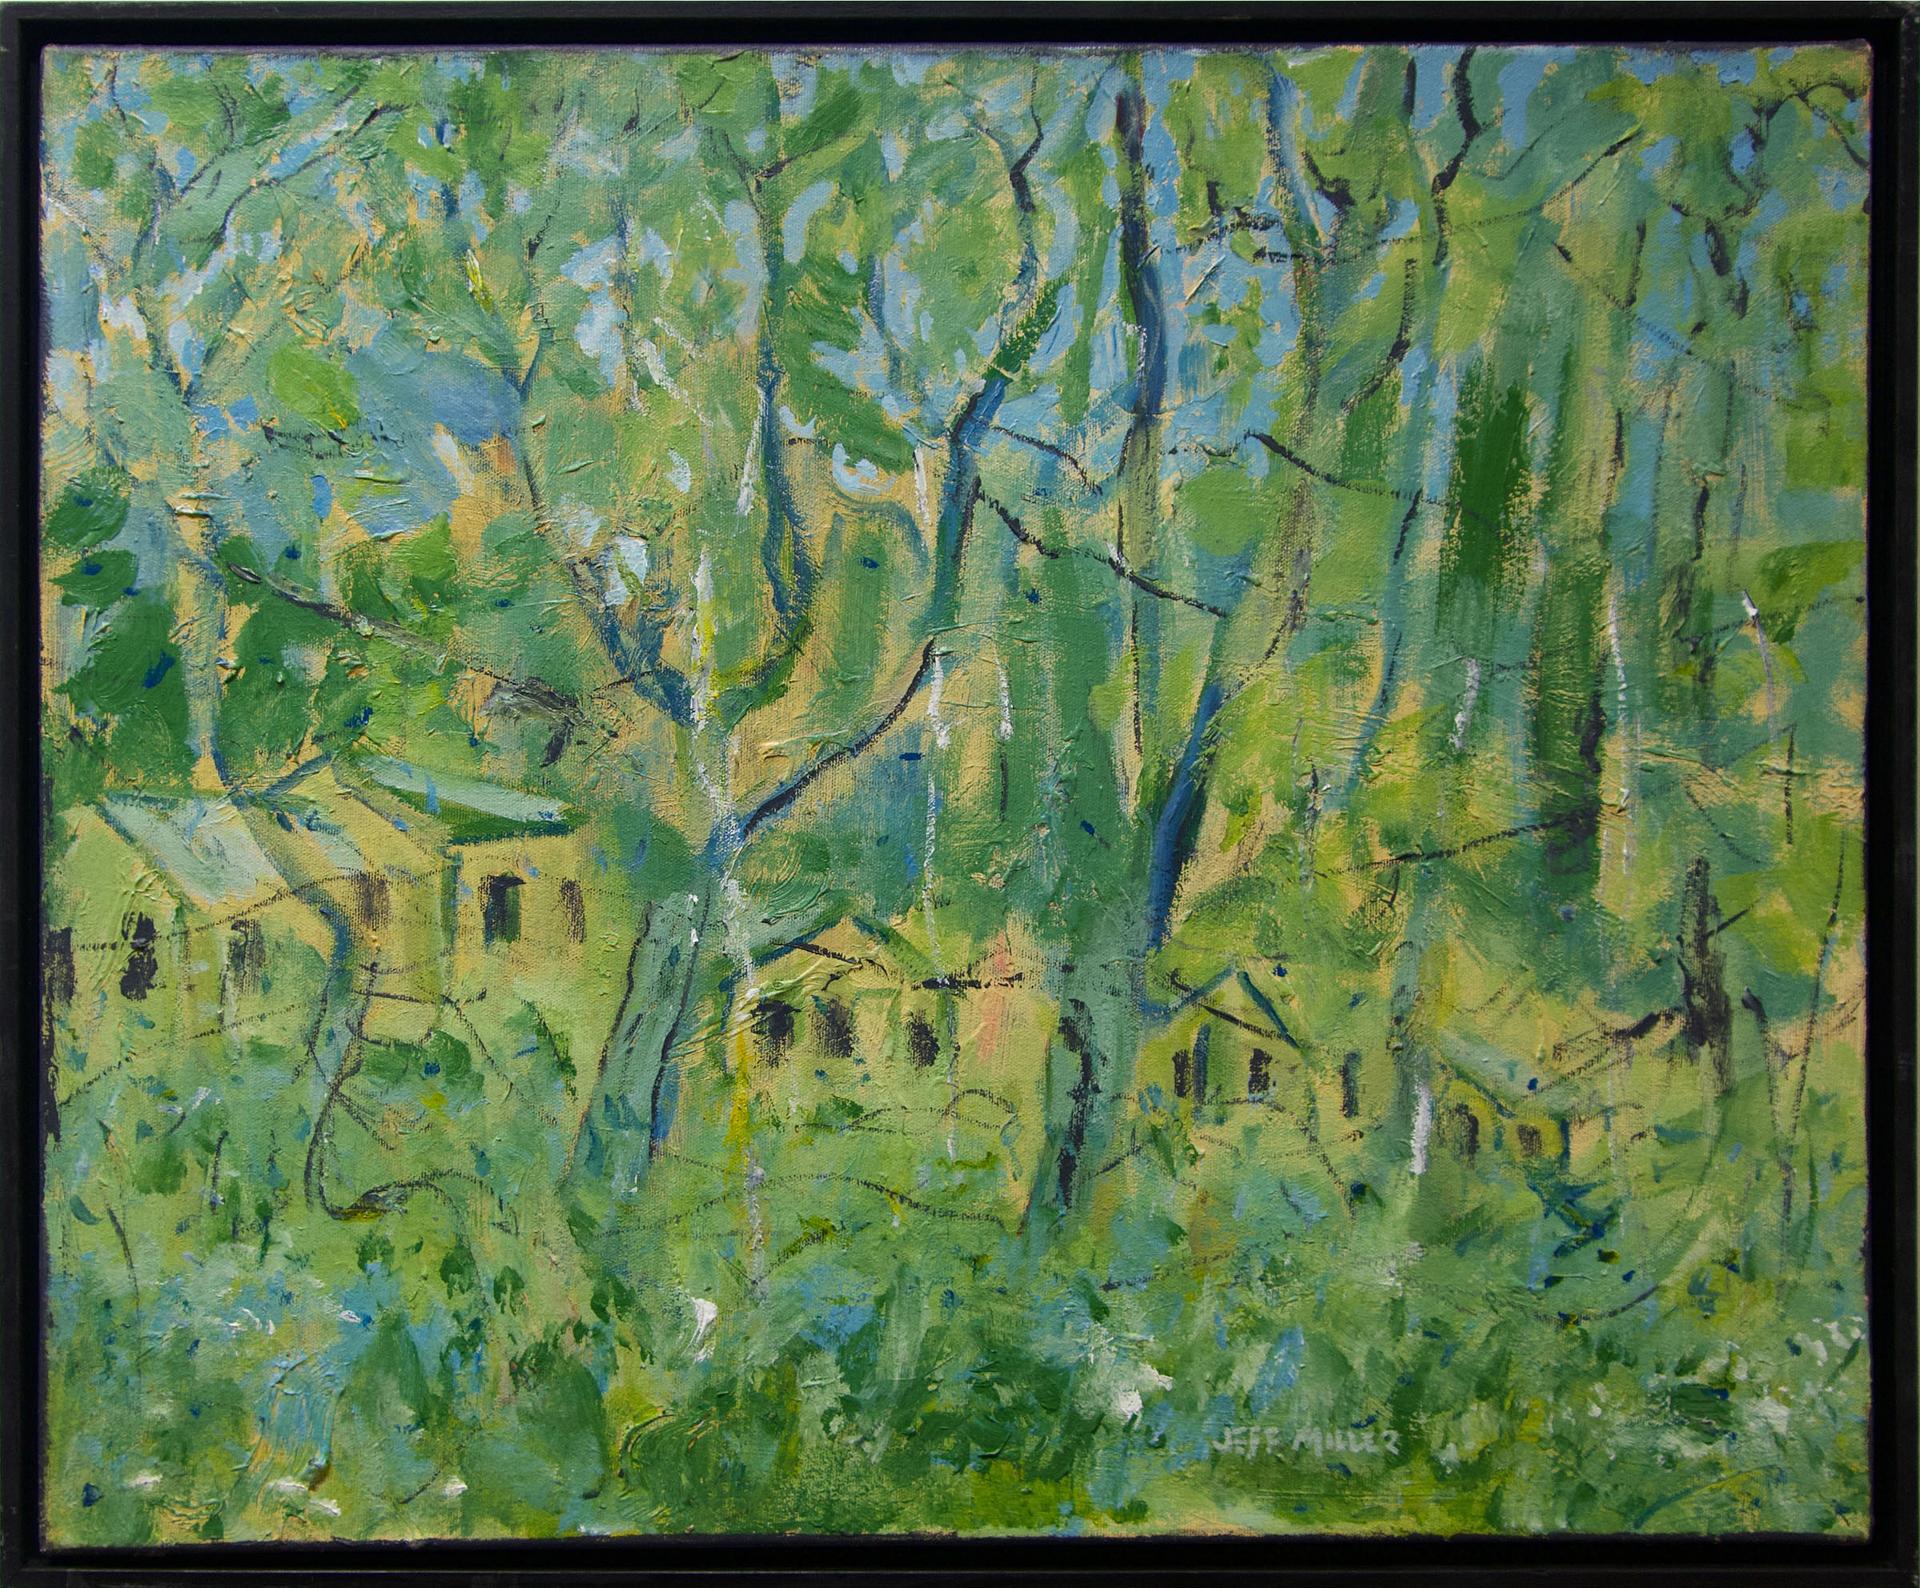 Jeff Miller (1931) - Untitled (Green Woodlands With Houses)